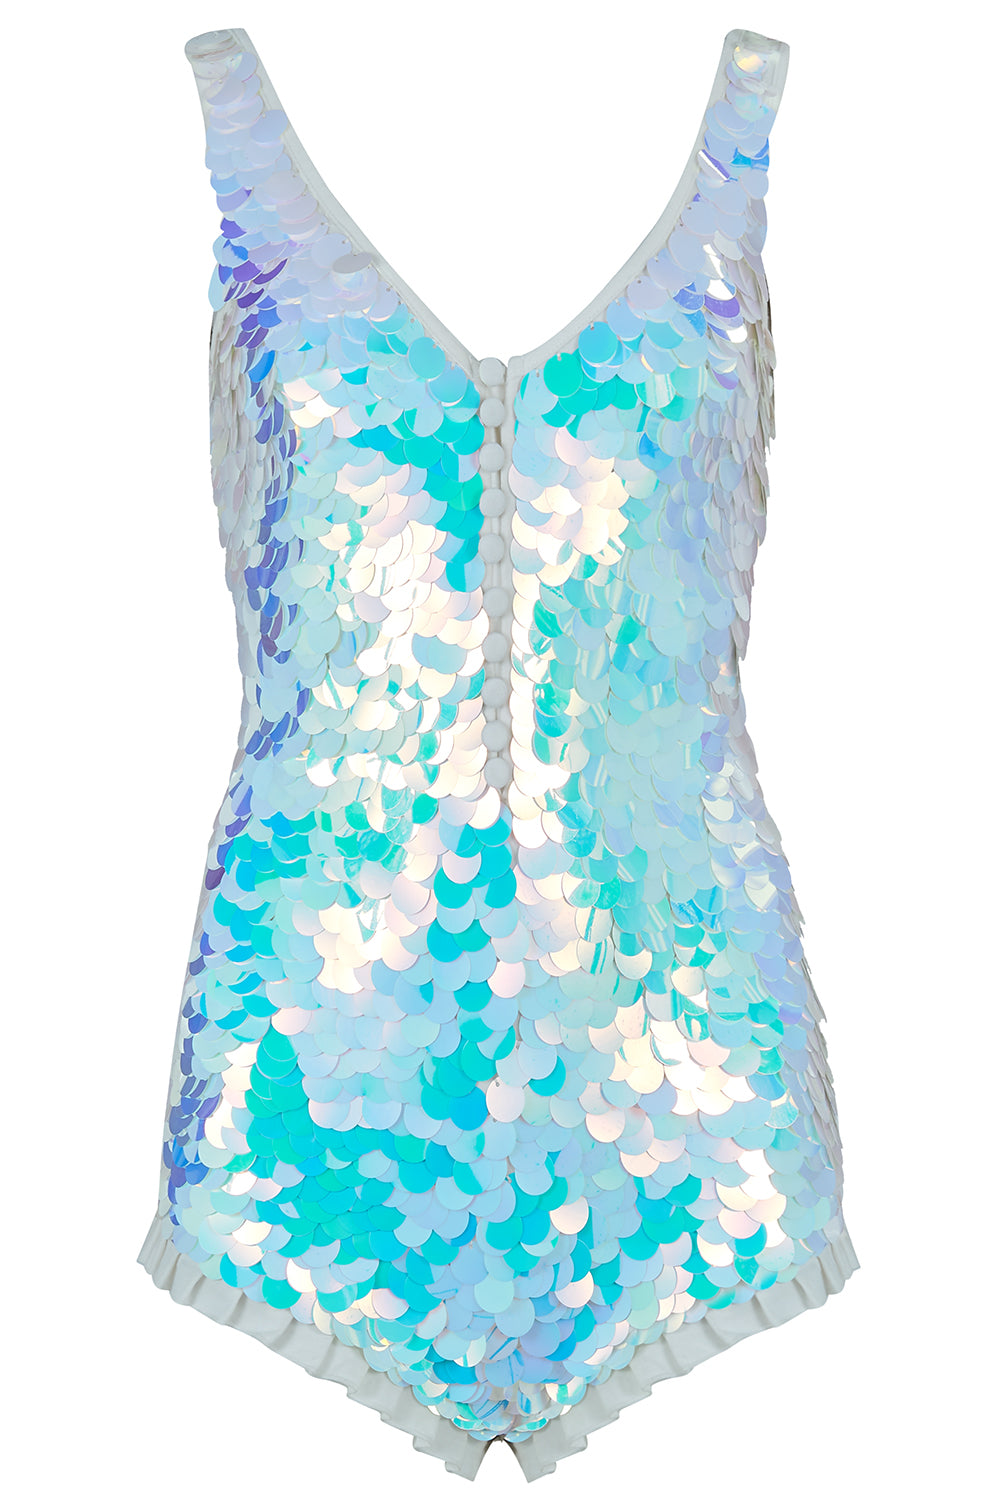 Sea Circus playsuit in Opal